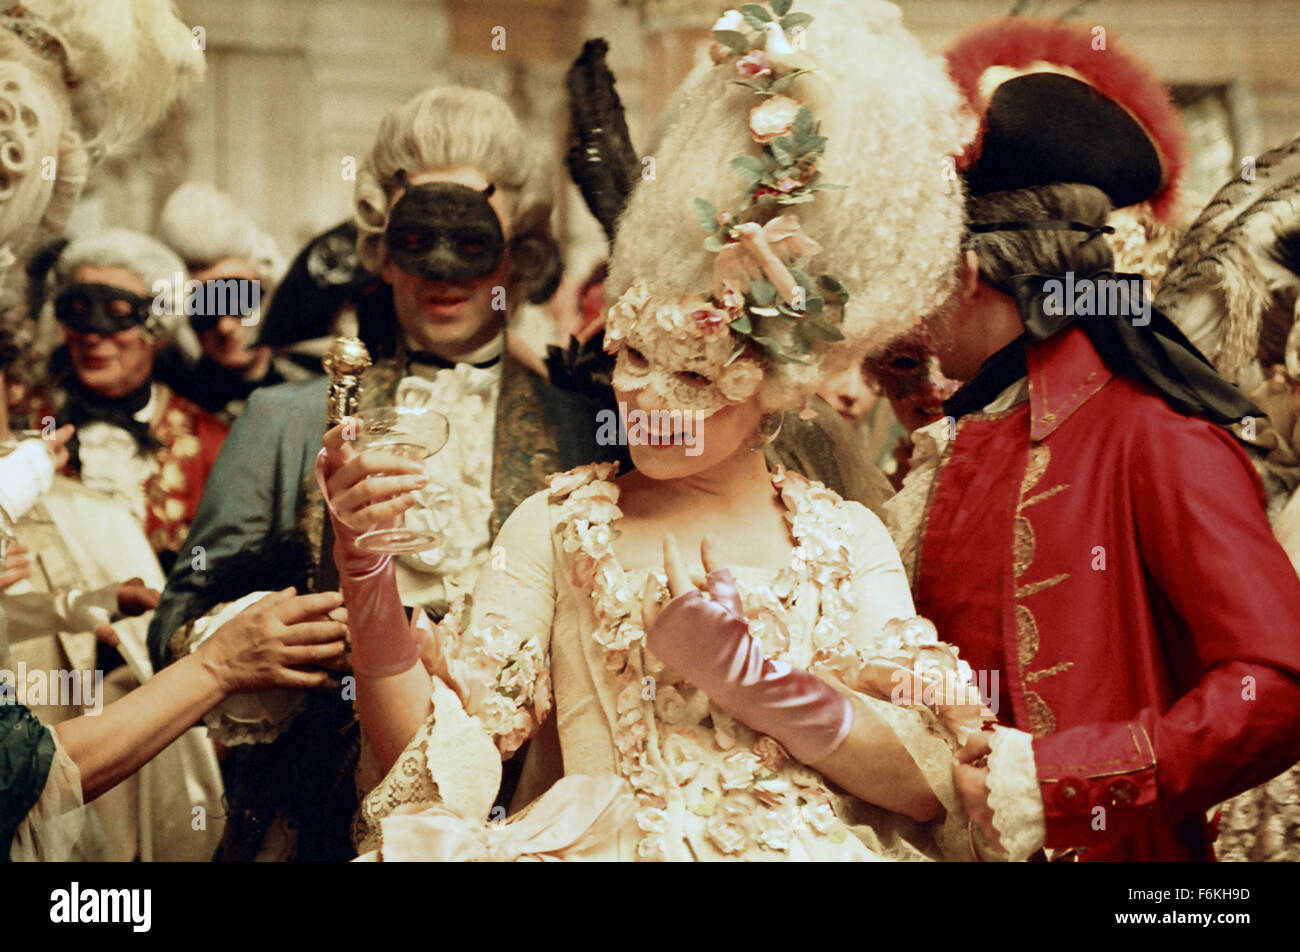 RELEASE DATE: October 20, 2006. MOVIE TITLE: Marie Antoinette. STUDIO: Columbia Pictures. PLOT: The retelling of France's iconic but ill-fated queen, Marie Antoinette. From her betrothal and marriage to Louis XVI at 15 to her reign as queen at 19 and to her beheading in 1793 at the age of 38. PICTURED: KIRSTEN DUNST as Marie Antoinette. Stock Photo